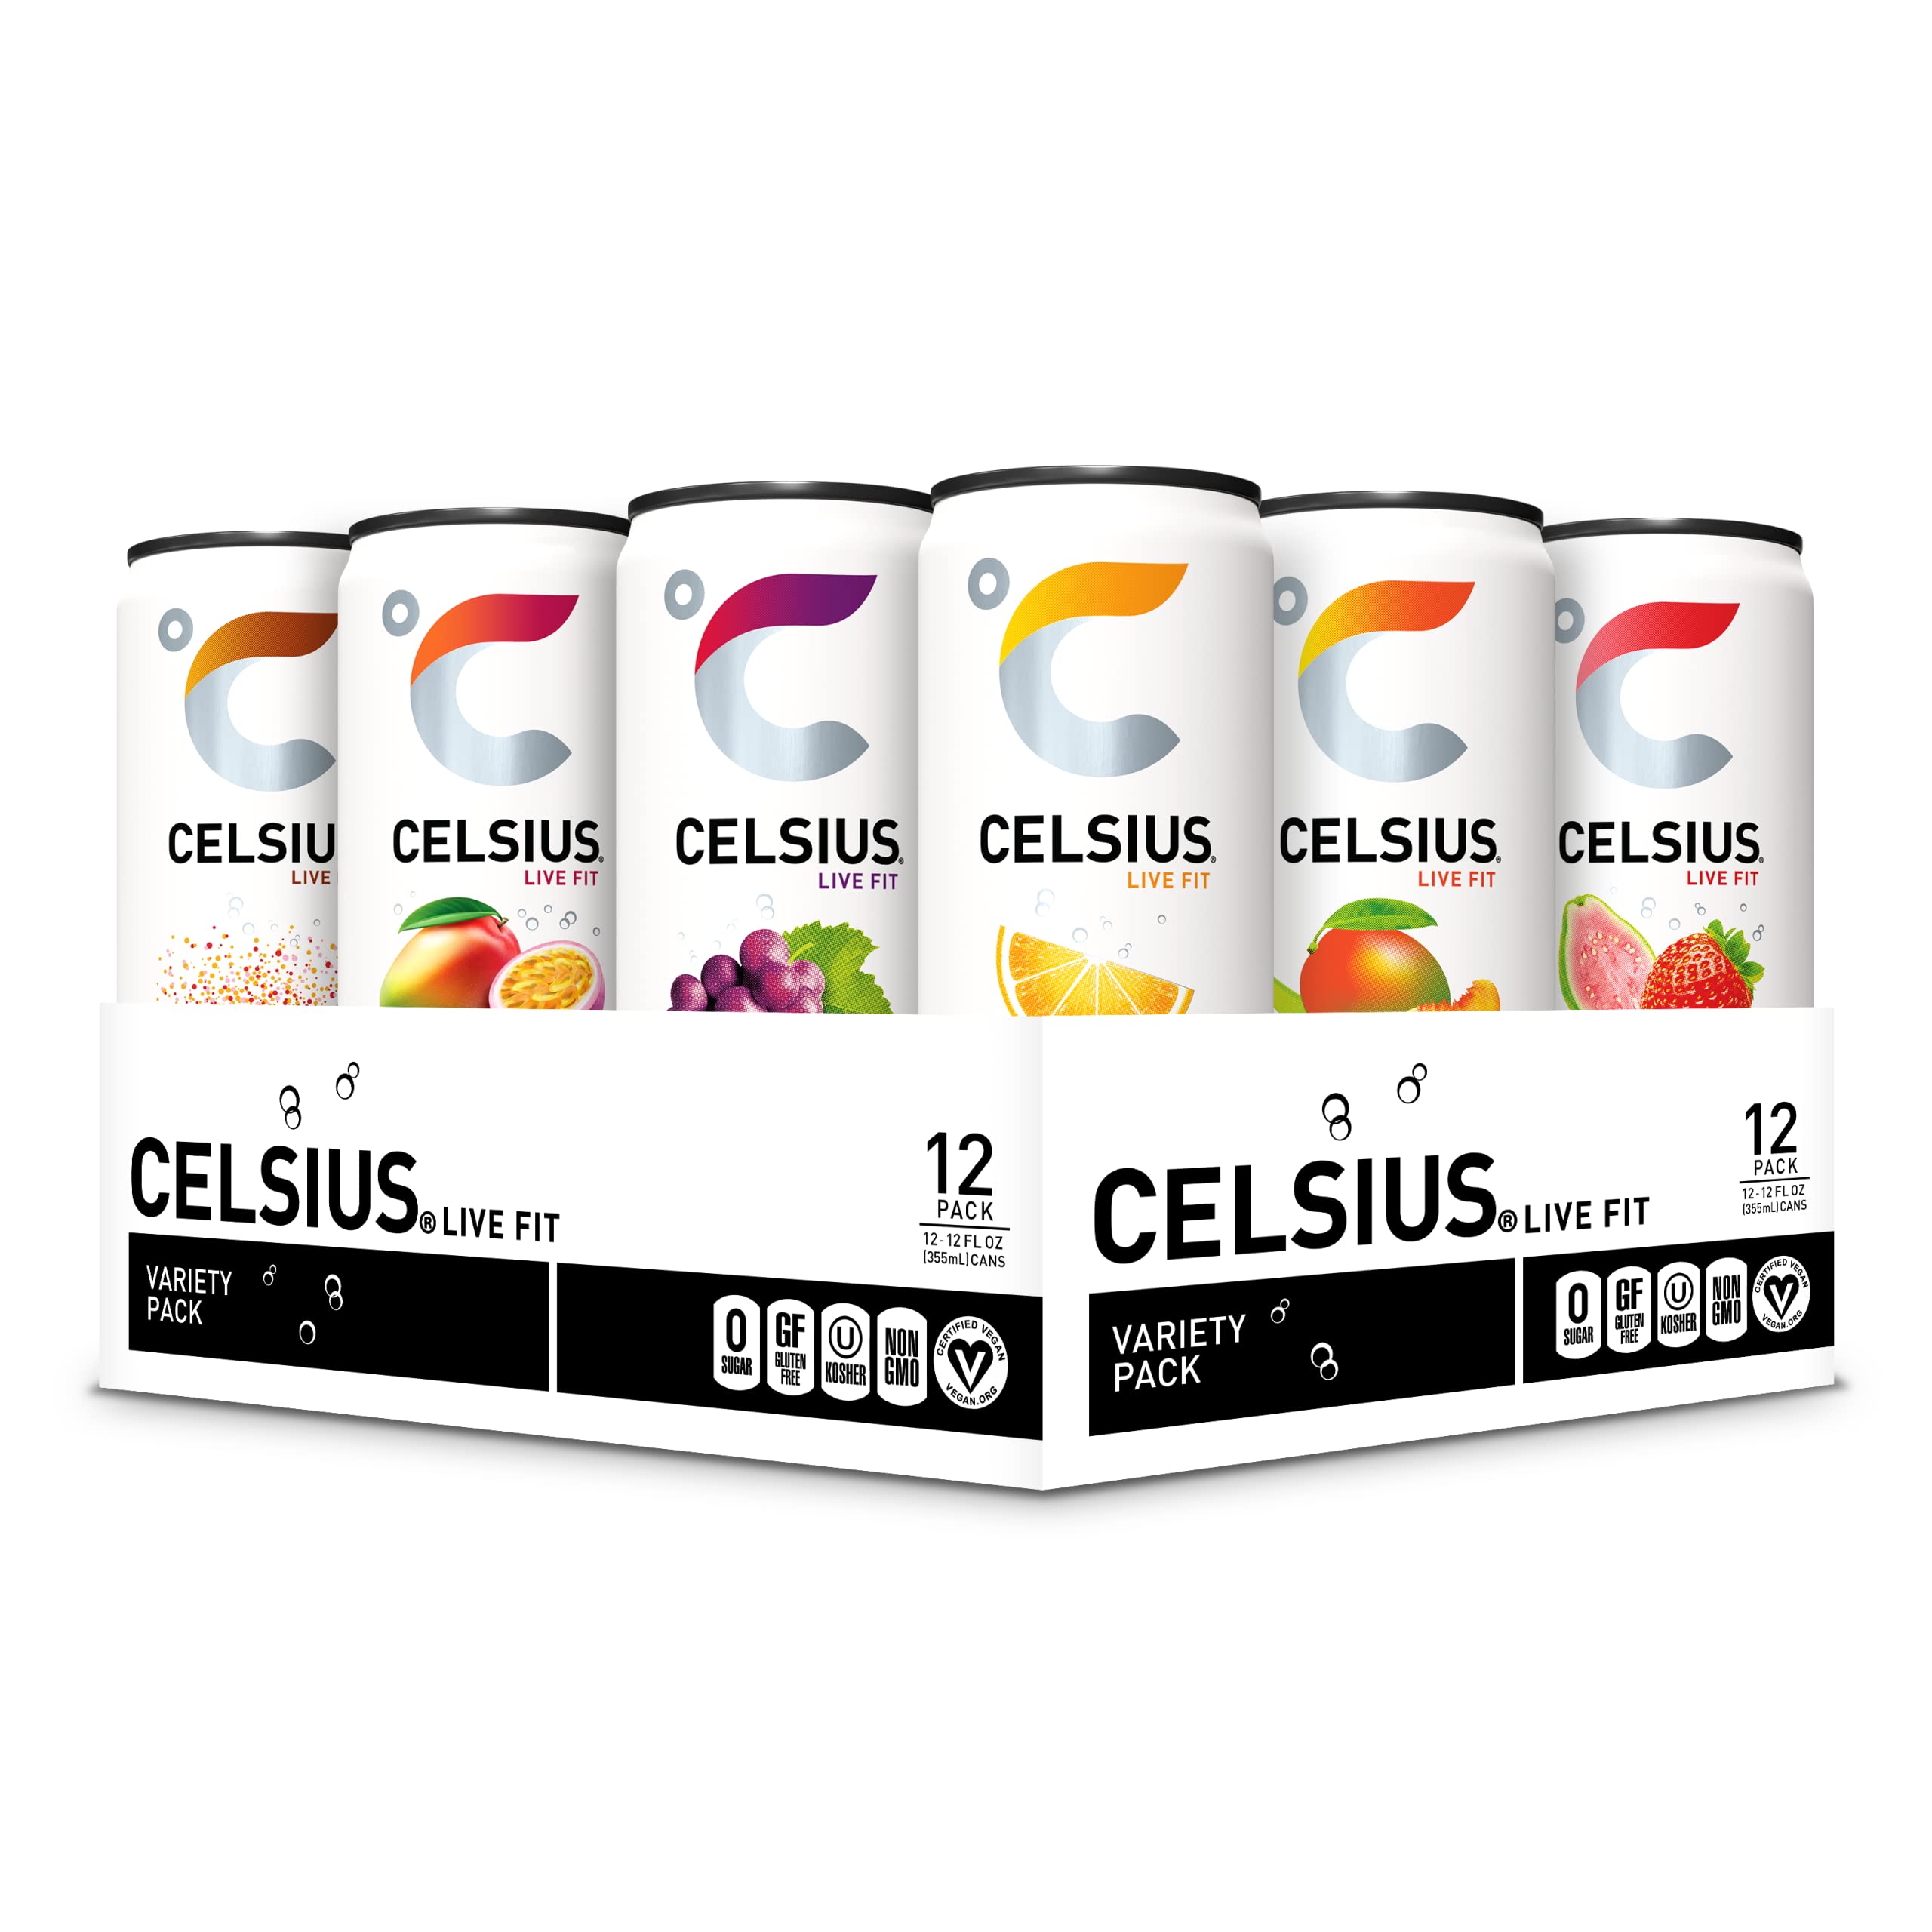 CELSIUS Assorted Flavors Variety Pack or Peach Mango Green Tea Energy Drink 12 Fl Oz (Pack of 12) for $10.56 (w/ 40% off S&S order for select Amazon accounts)